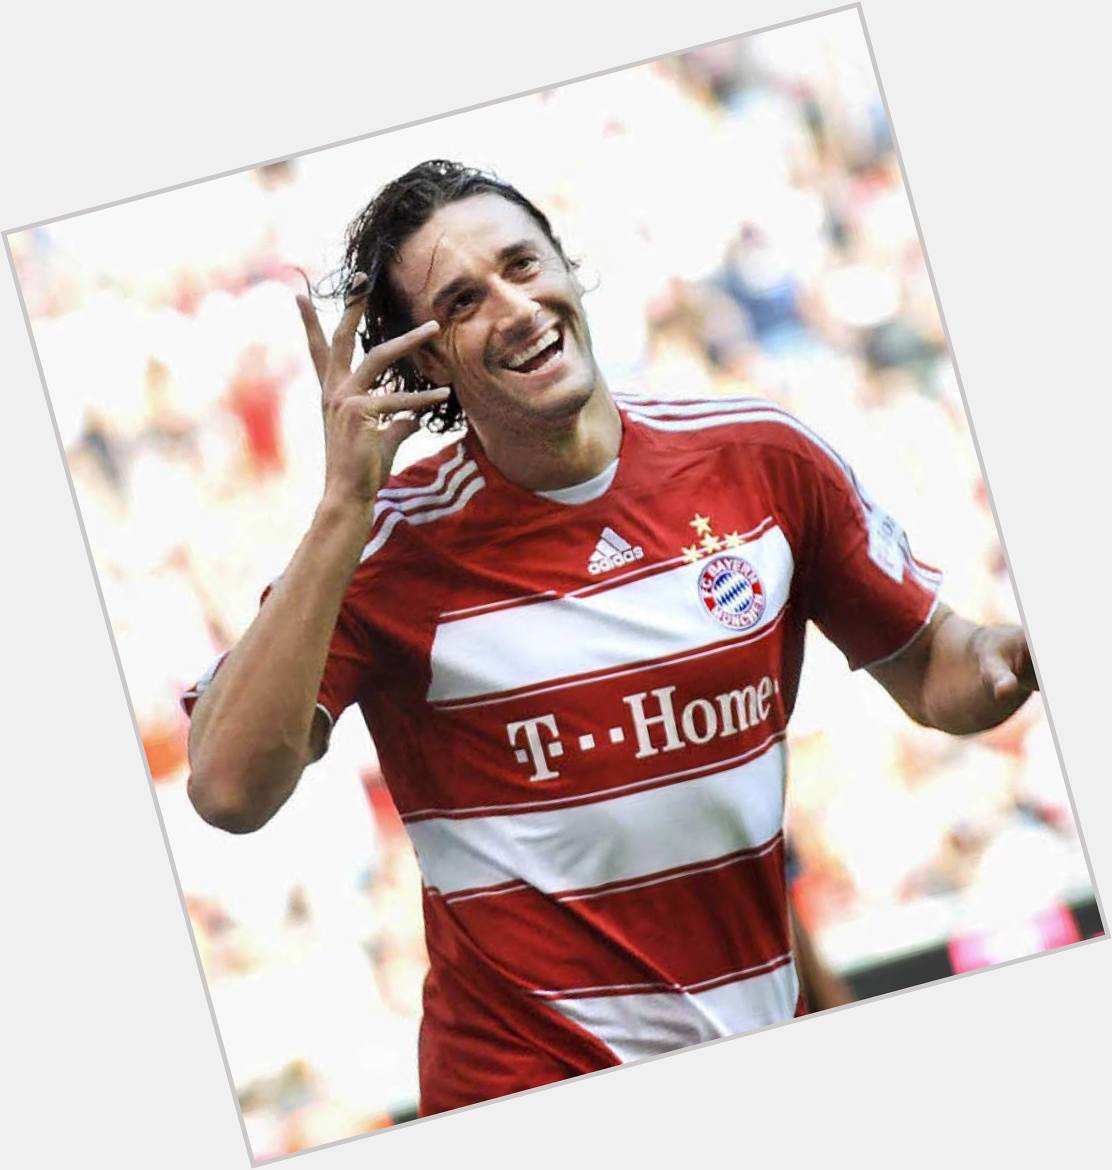 If Bayern calls me on phone again, I will go to play there, even without money.\"

Happy 38th Birthday Luca Toni! 